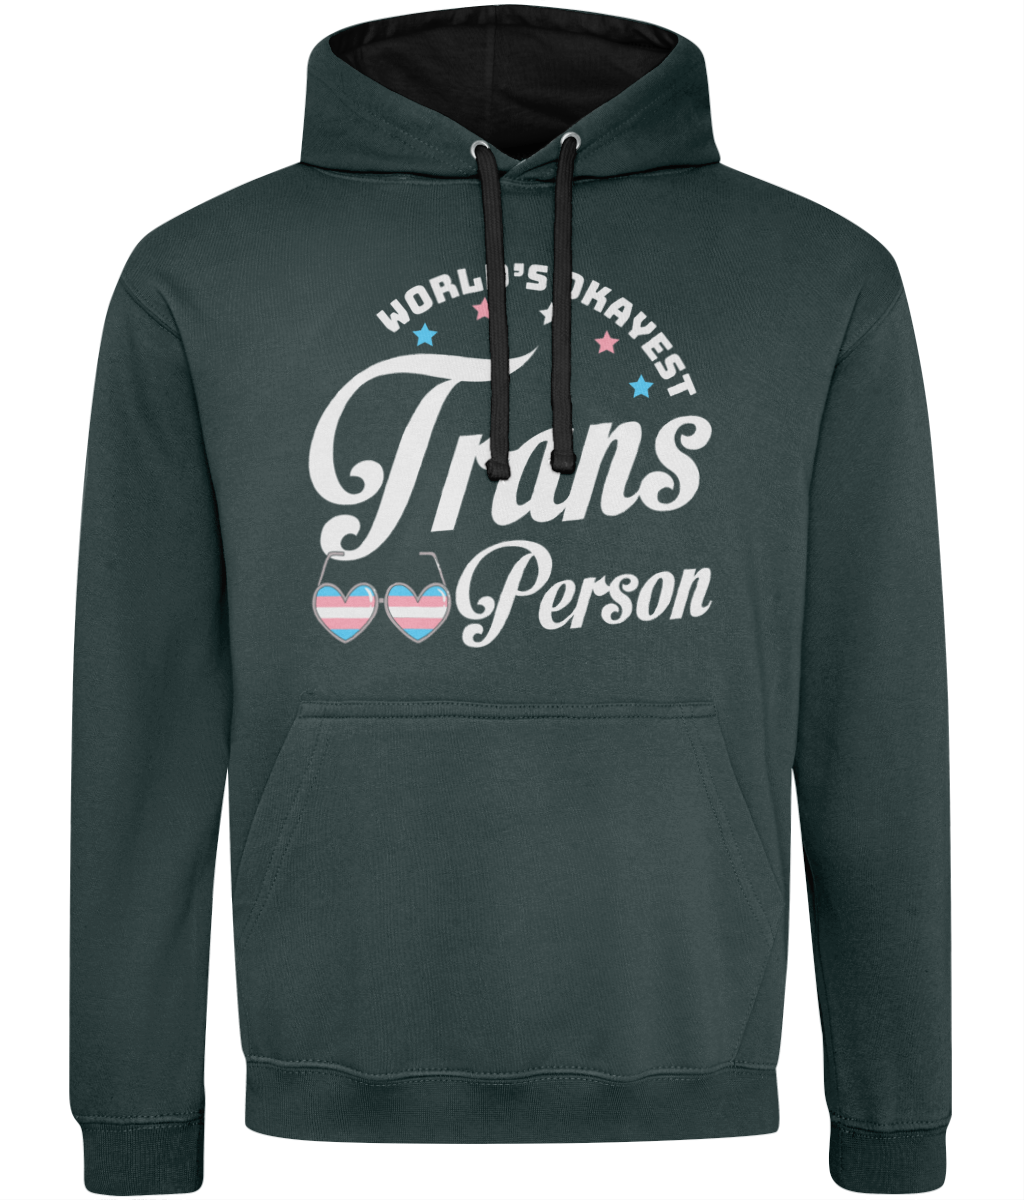 Worlds okayest trans person hoodie